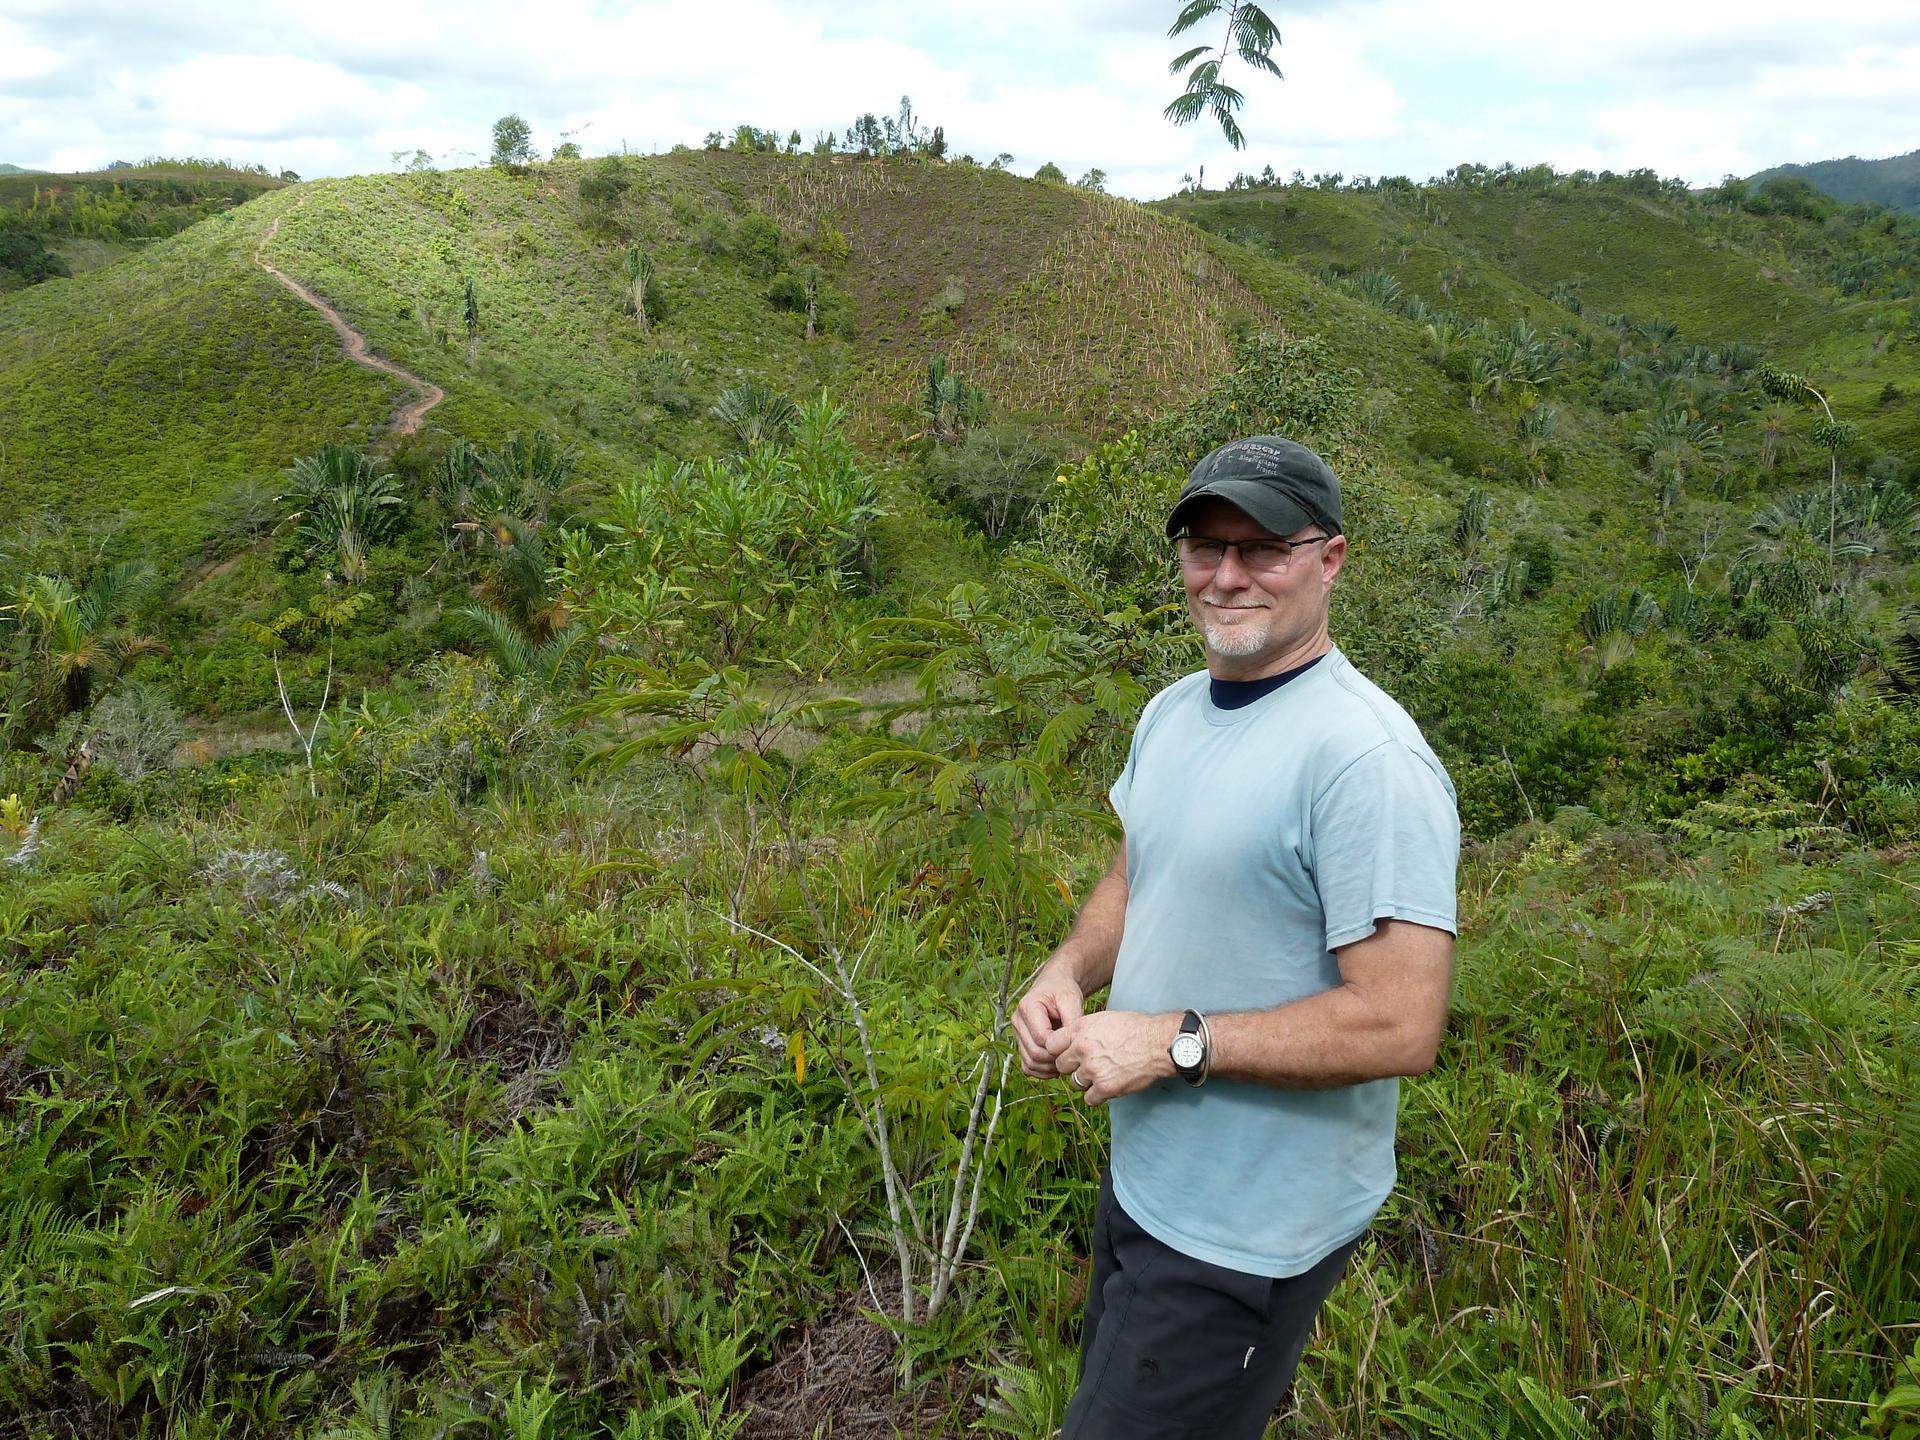 Madagascar Biodiversity Partnership director Ed Louis stands near a hillside recently replanted with new seedlings. The reforestation project depends on seeds eaten and pooped out by lemurs.